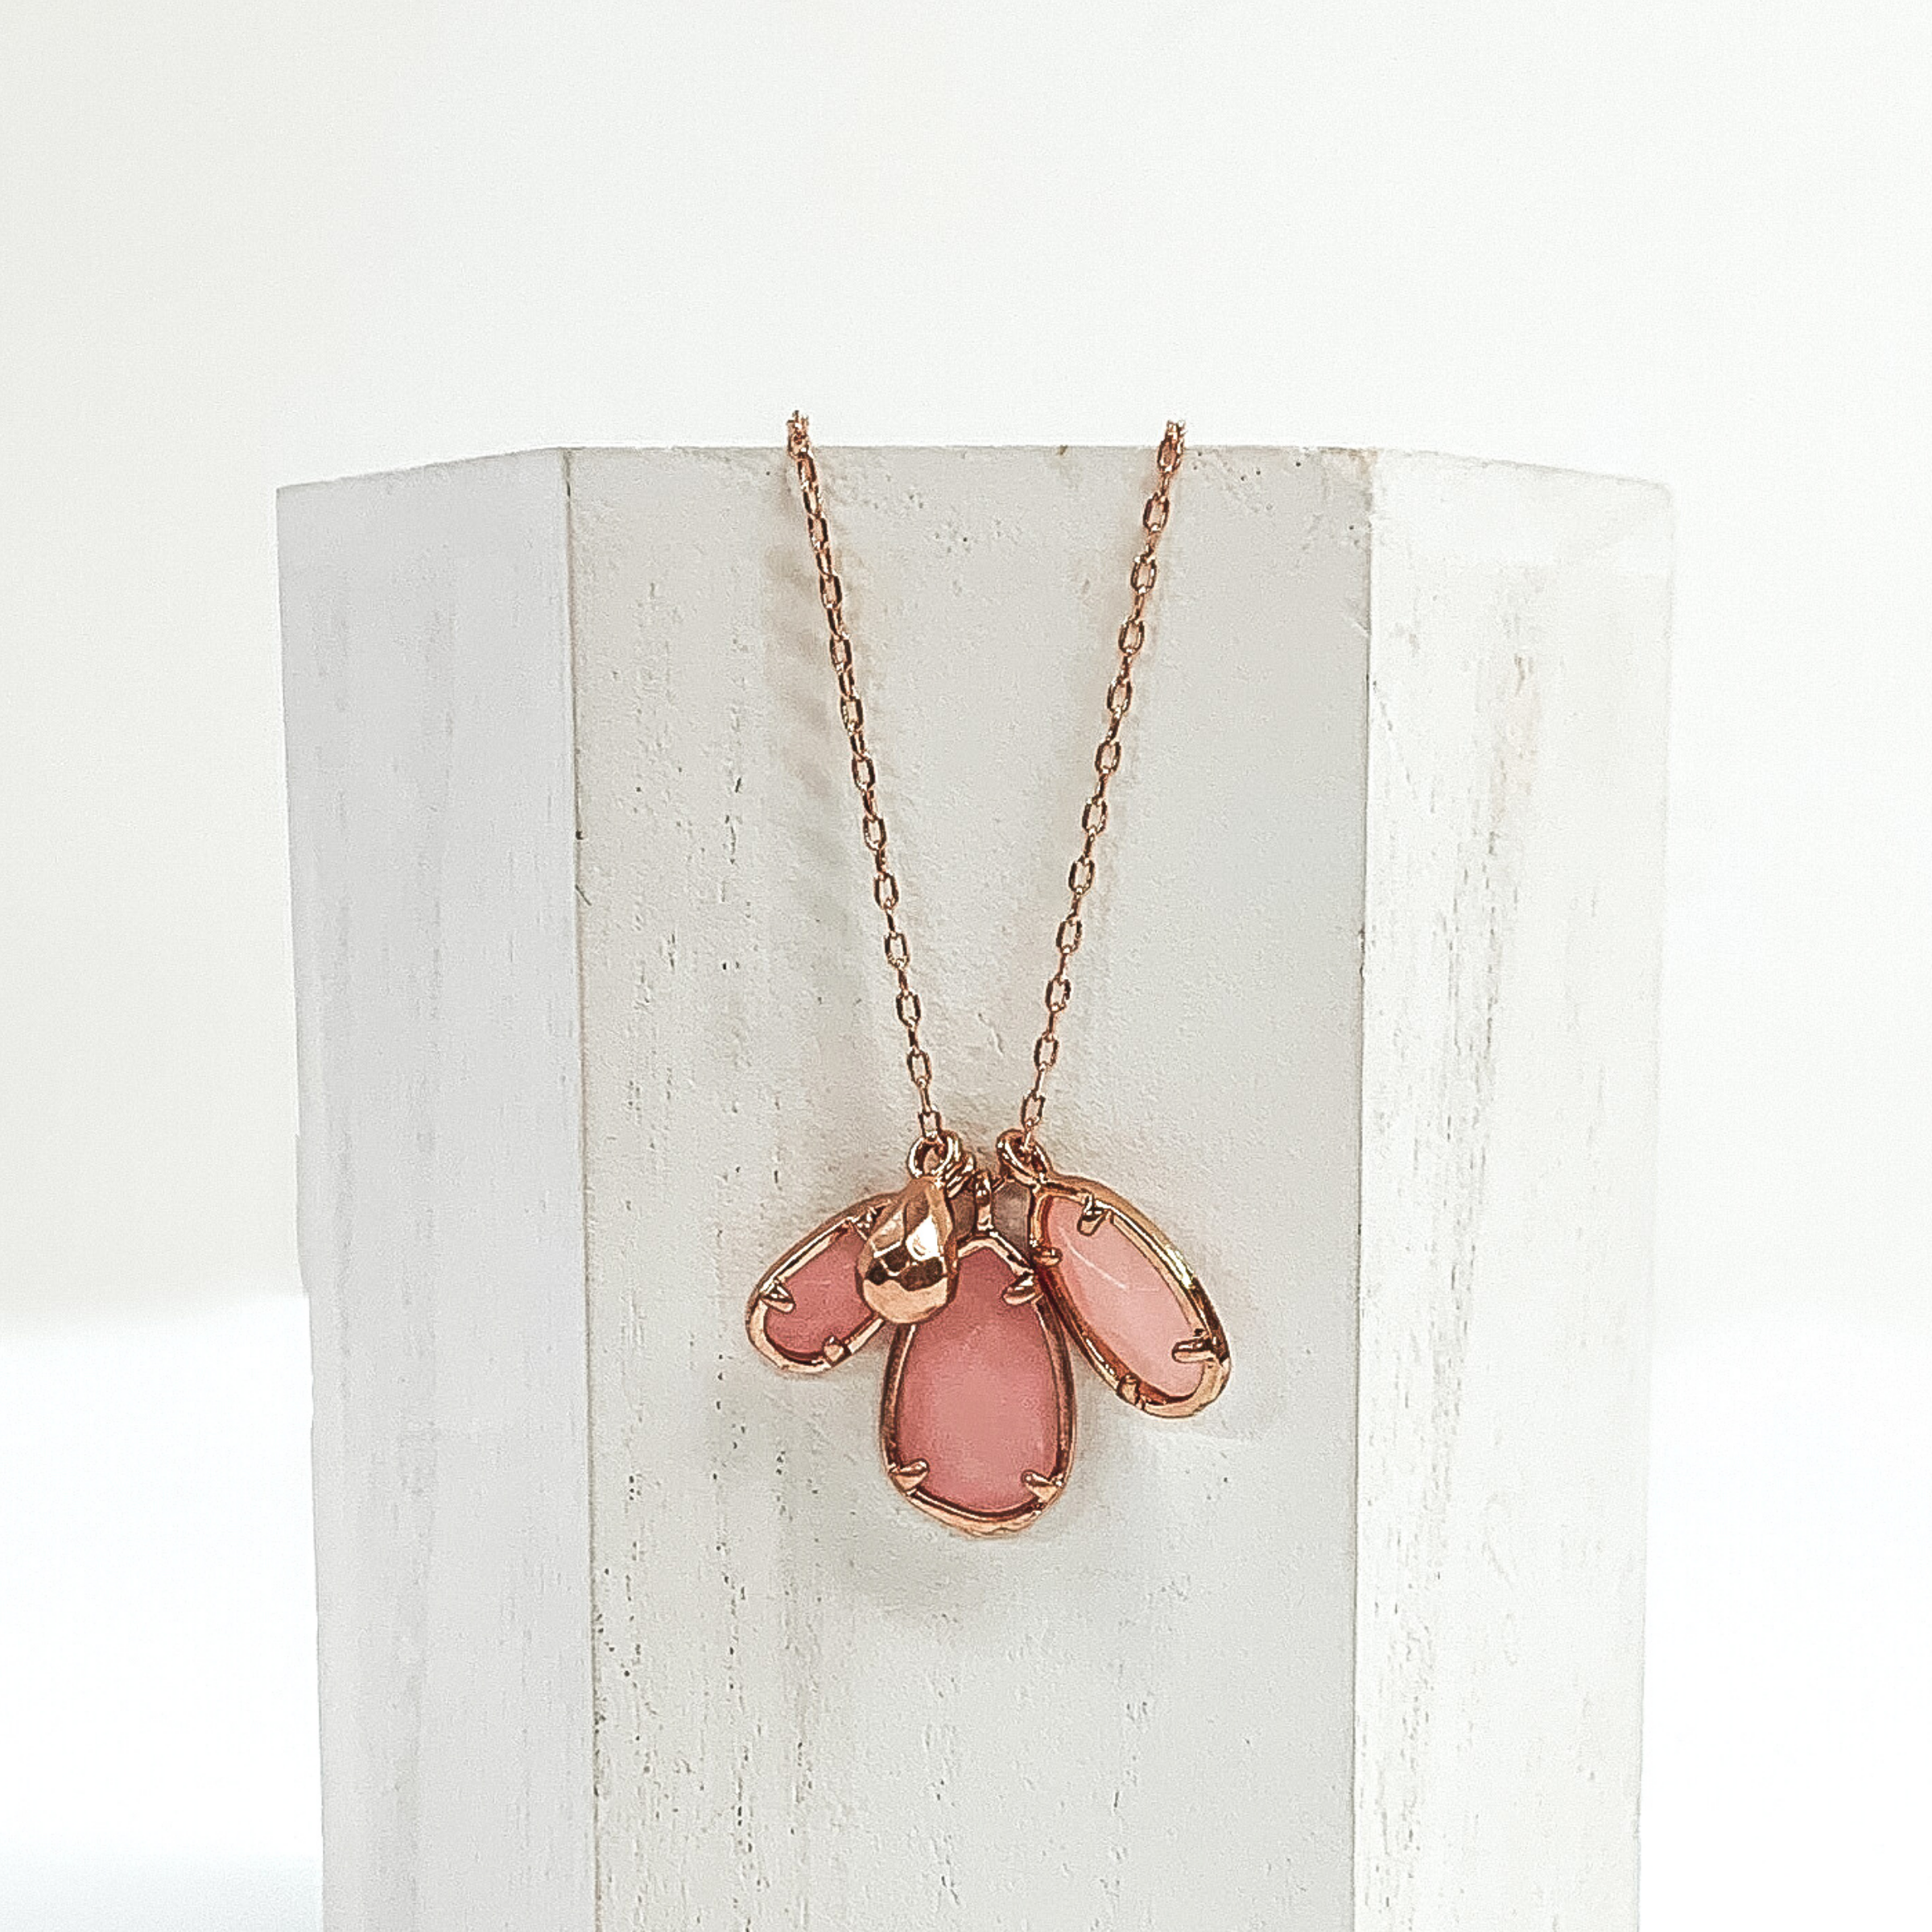 Small gold chain with three rose marbled teardrop stone pendants outlined in gold. It also has a tiny gold teardrop pendant. This necklace is pictured laying a white piece of wood on a white background.